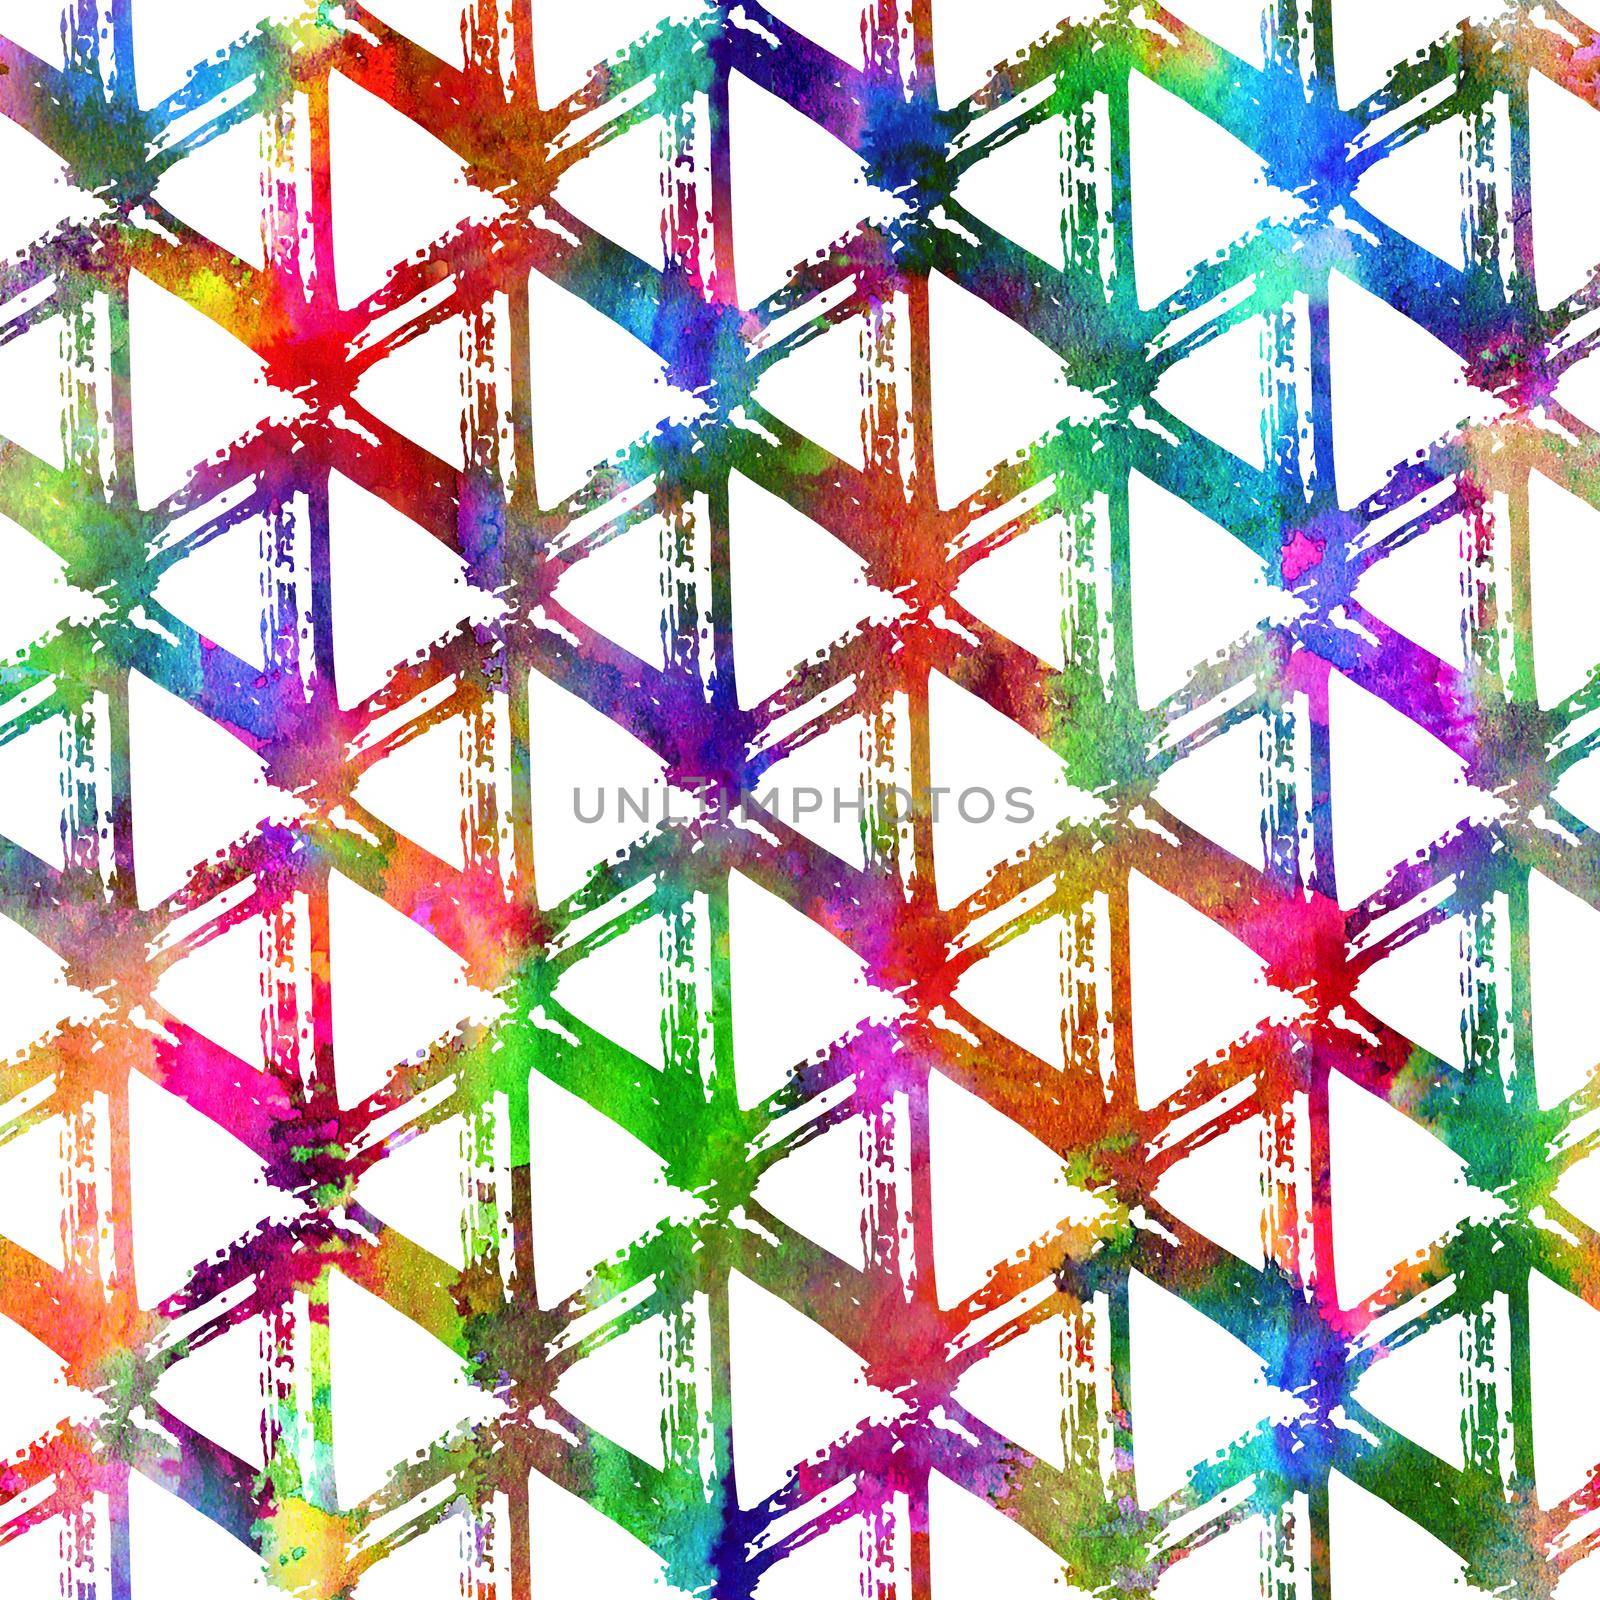 Brush Stroke Geometric Grung Pattern Seamless in Rainbow Color Background. Gunge Collage Watercolor Texture for Teen and School Kids Fabric Prints Grange Design with line by DesignAB